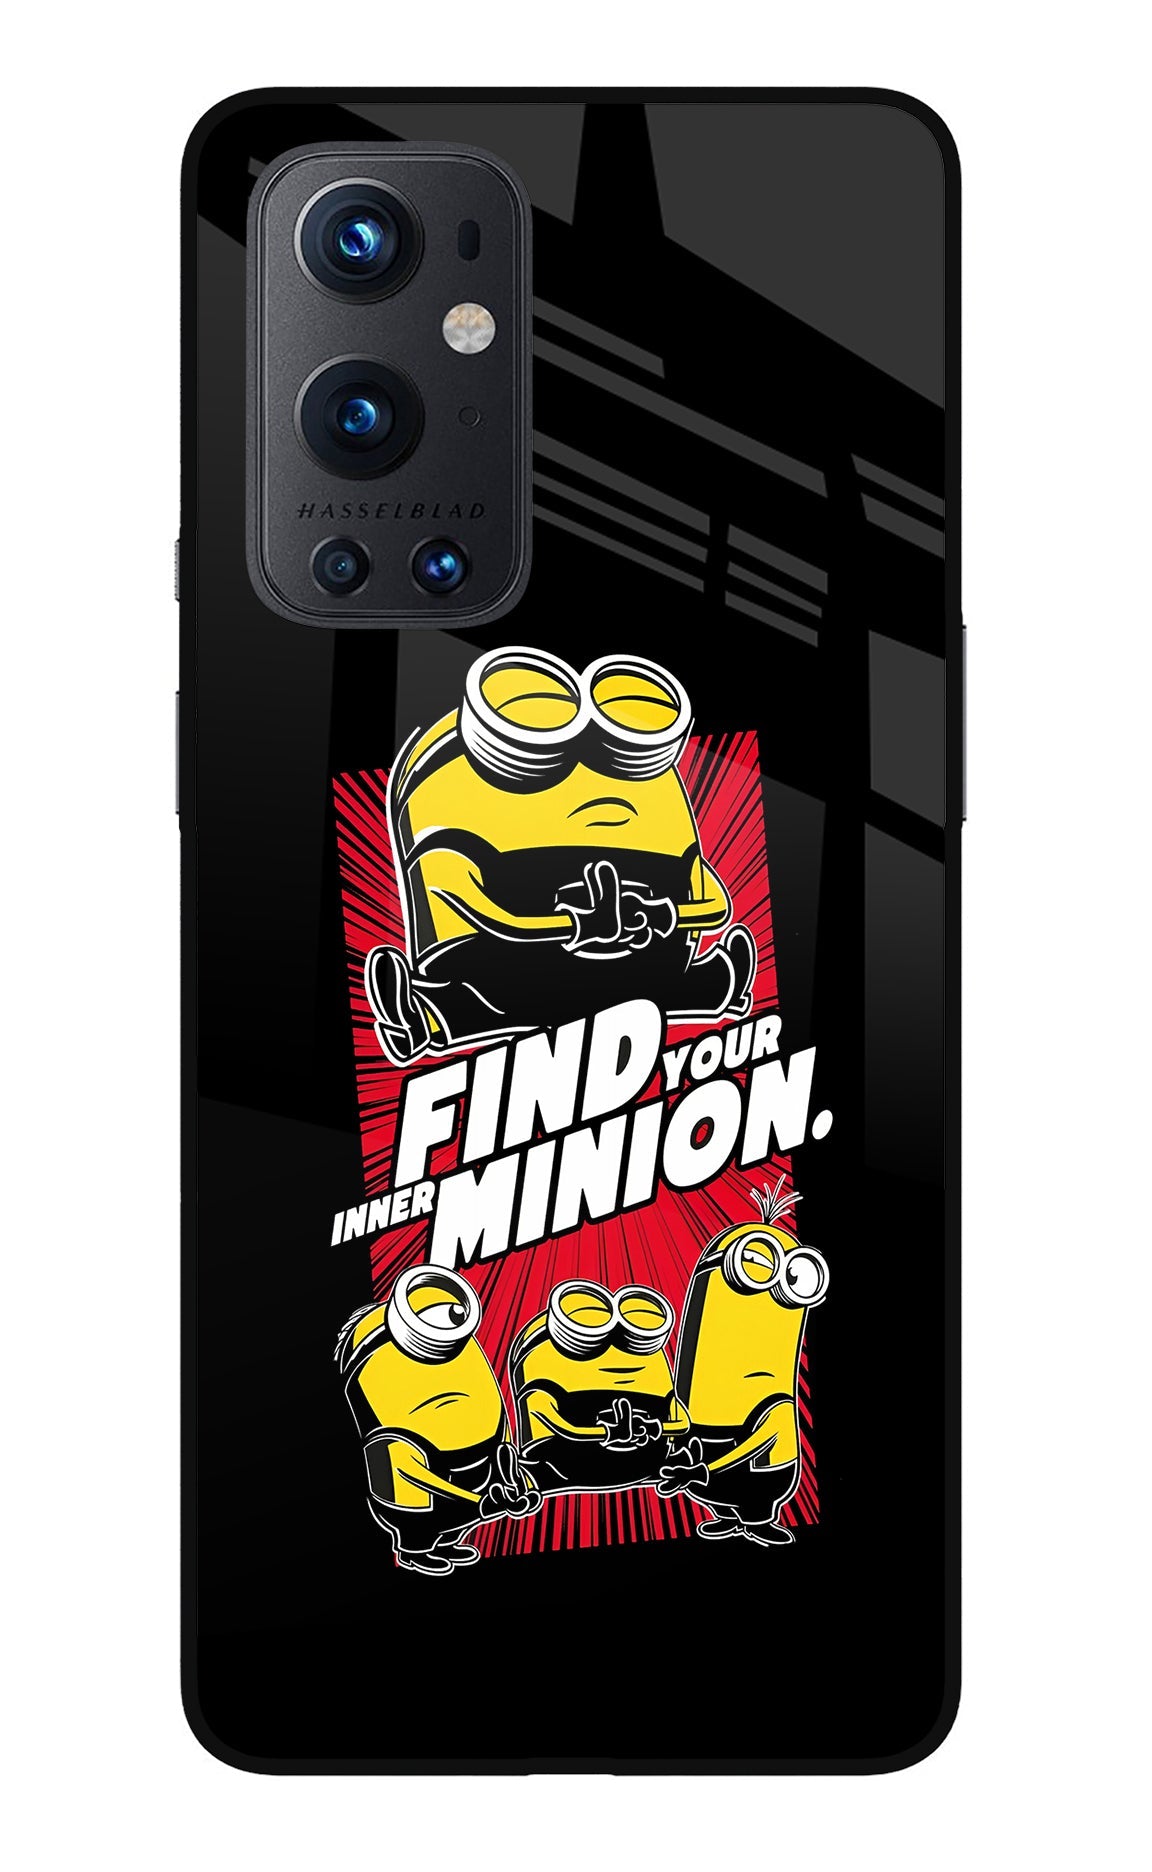 Find your inner Minion Oneplus 9 Pro Glass Case